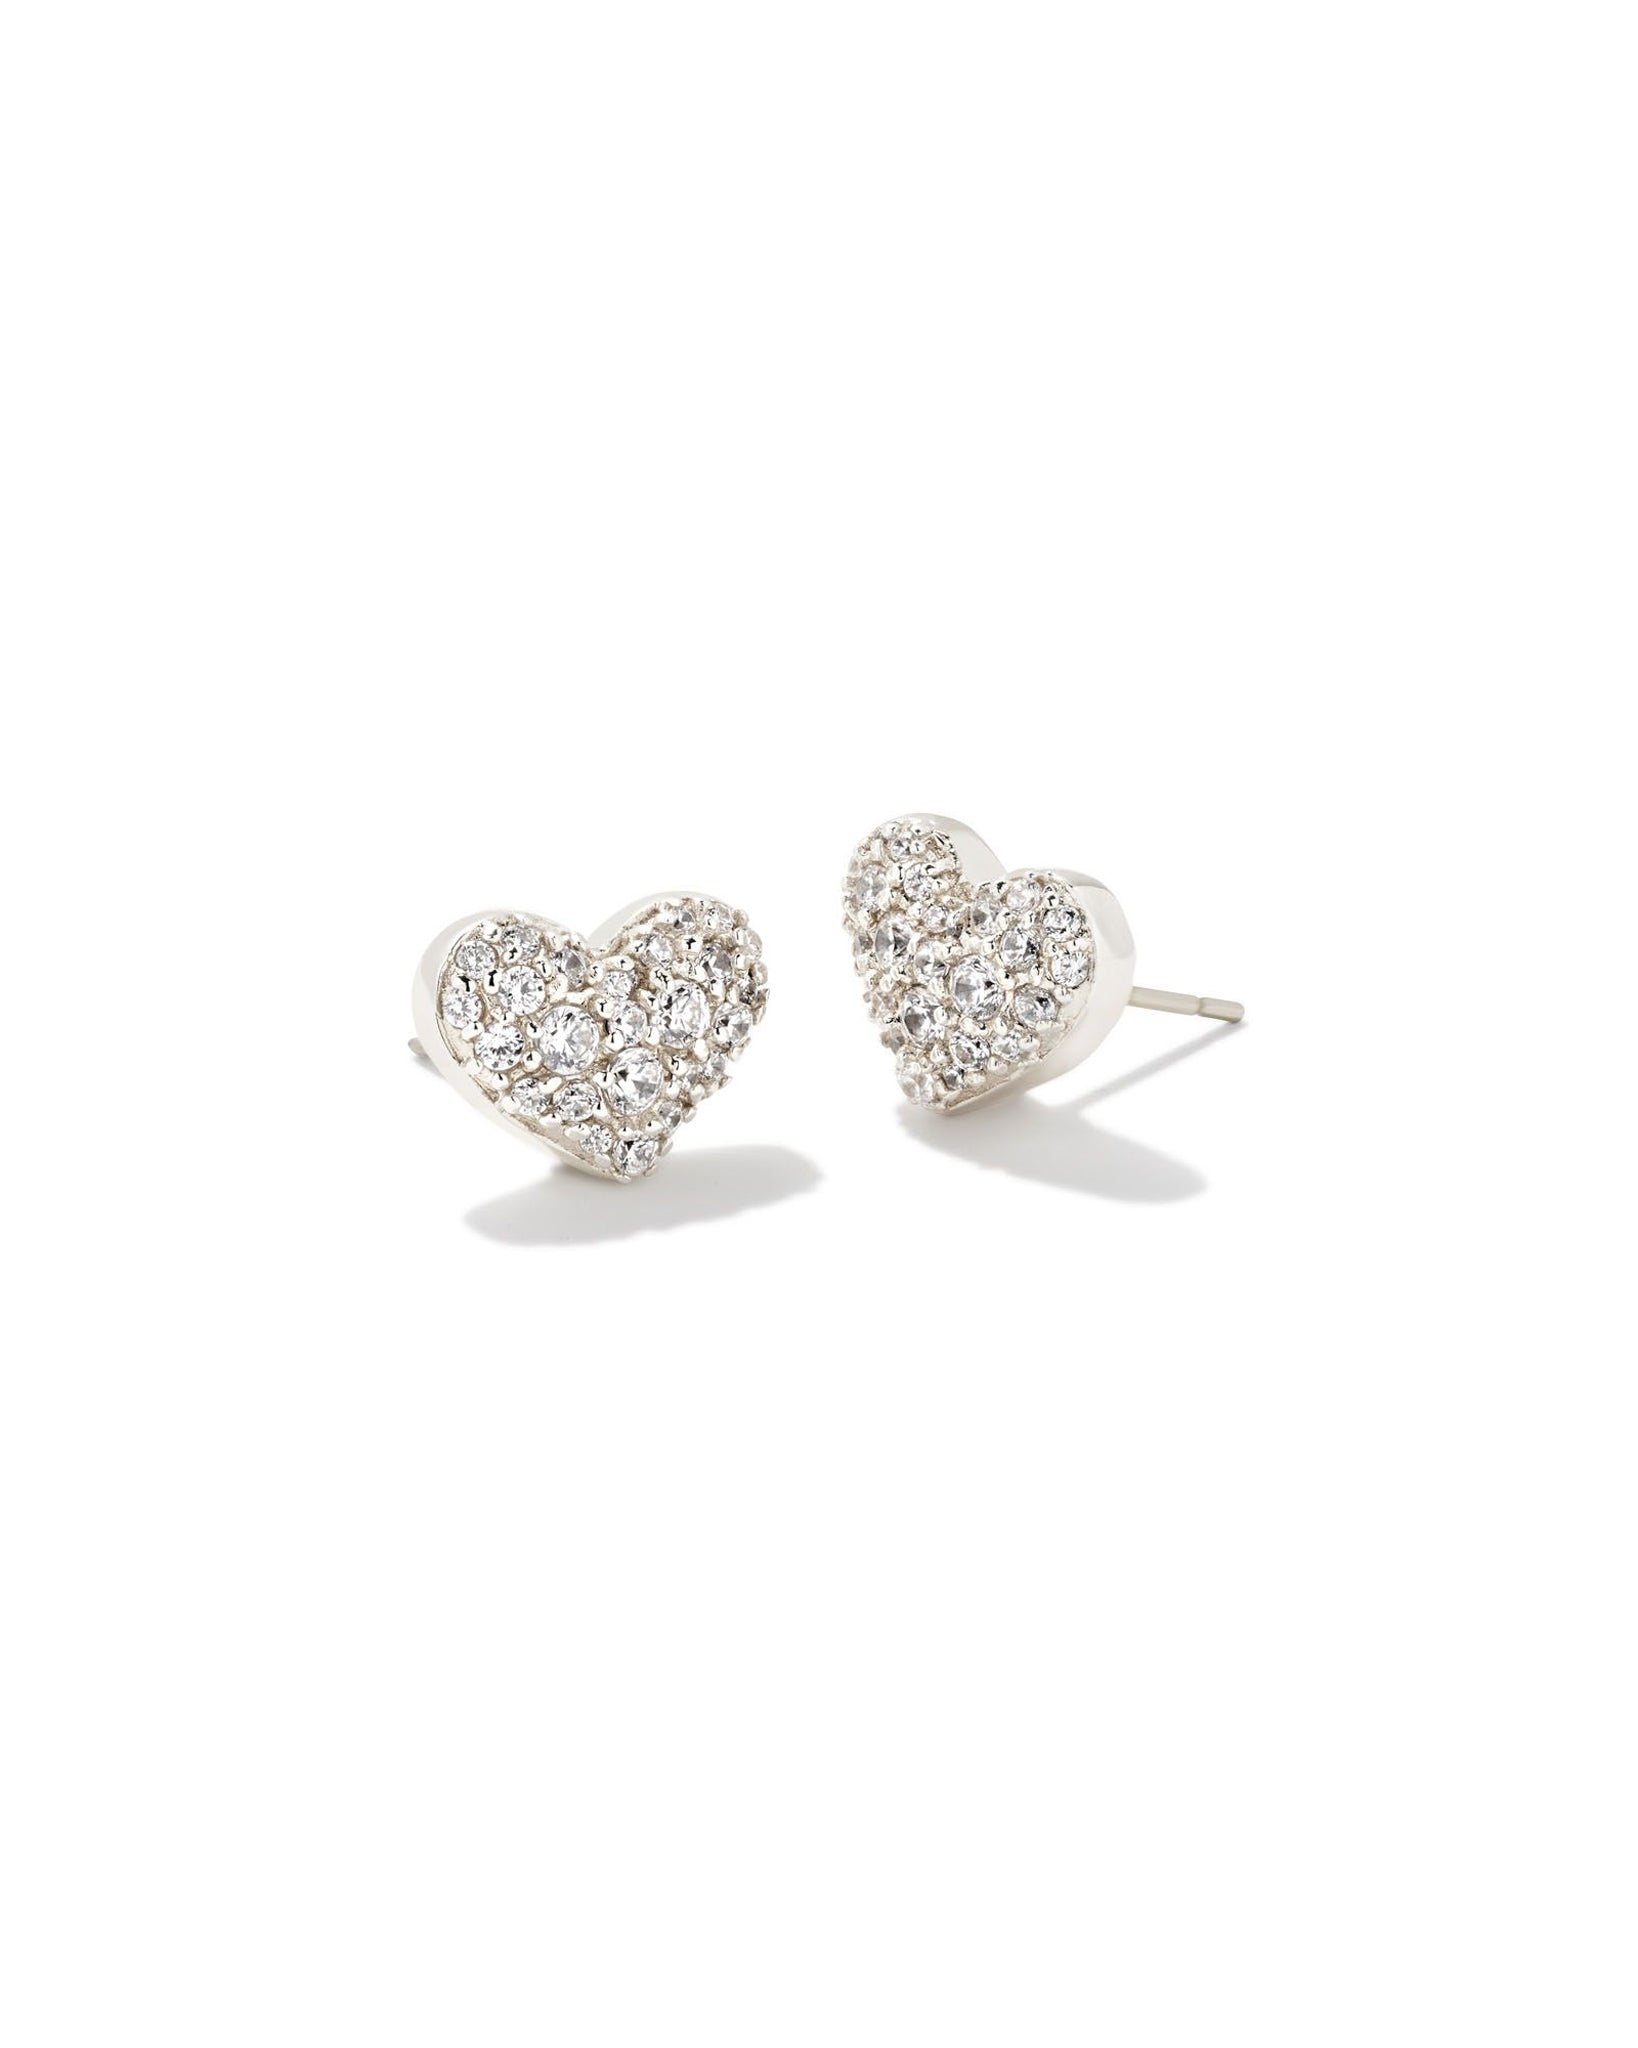 Kendra Scott Ari Pave Crystal Heart Stud Earrings in White Crystal and Rhodium Plated